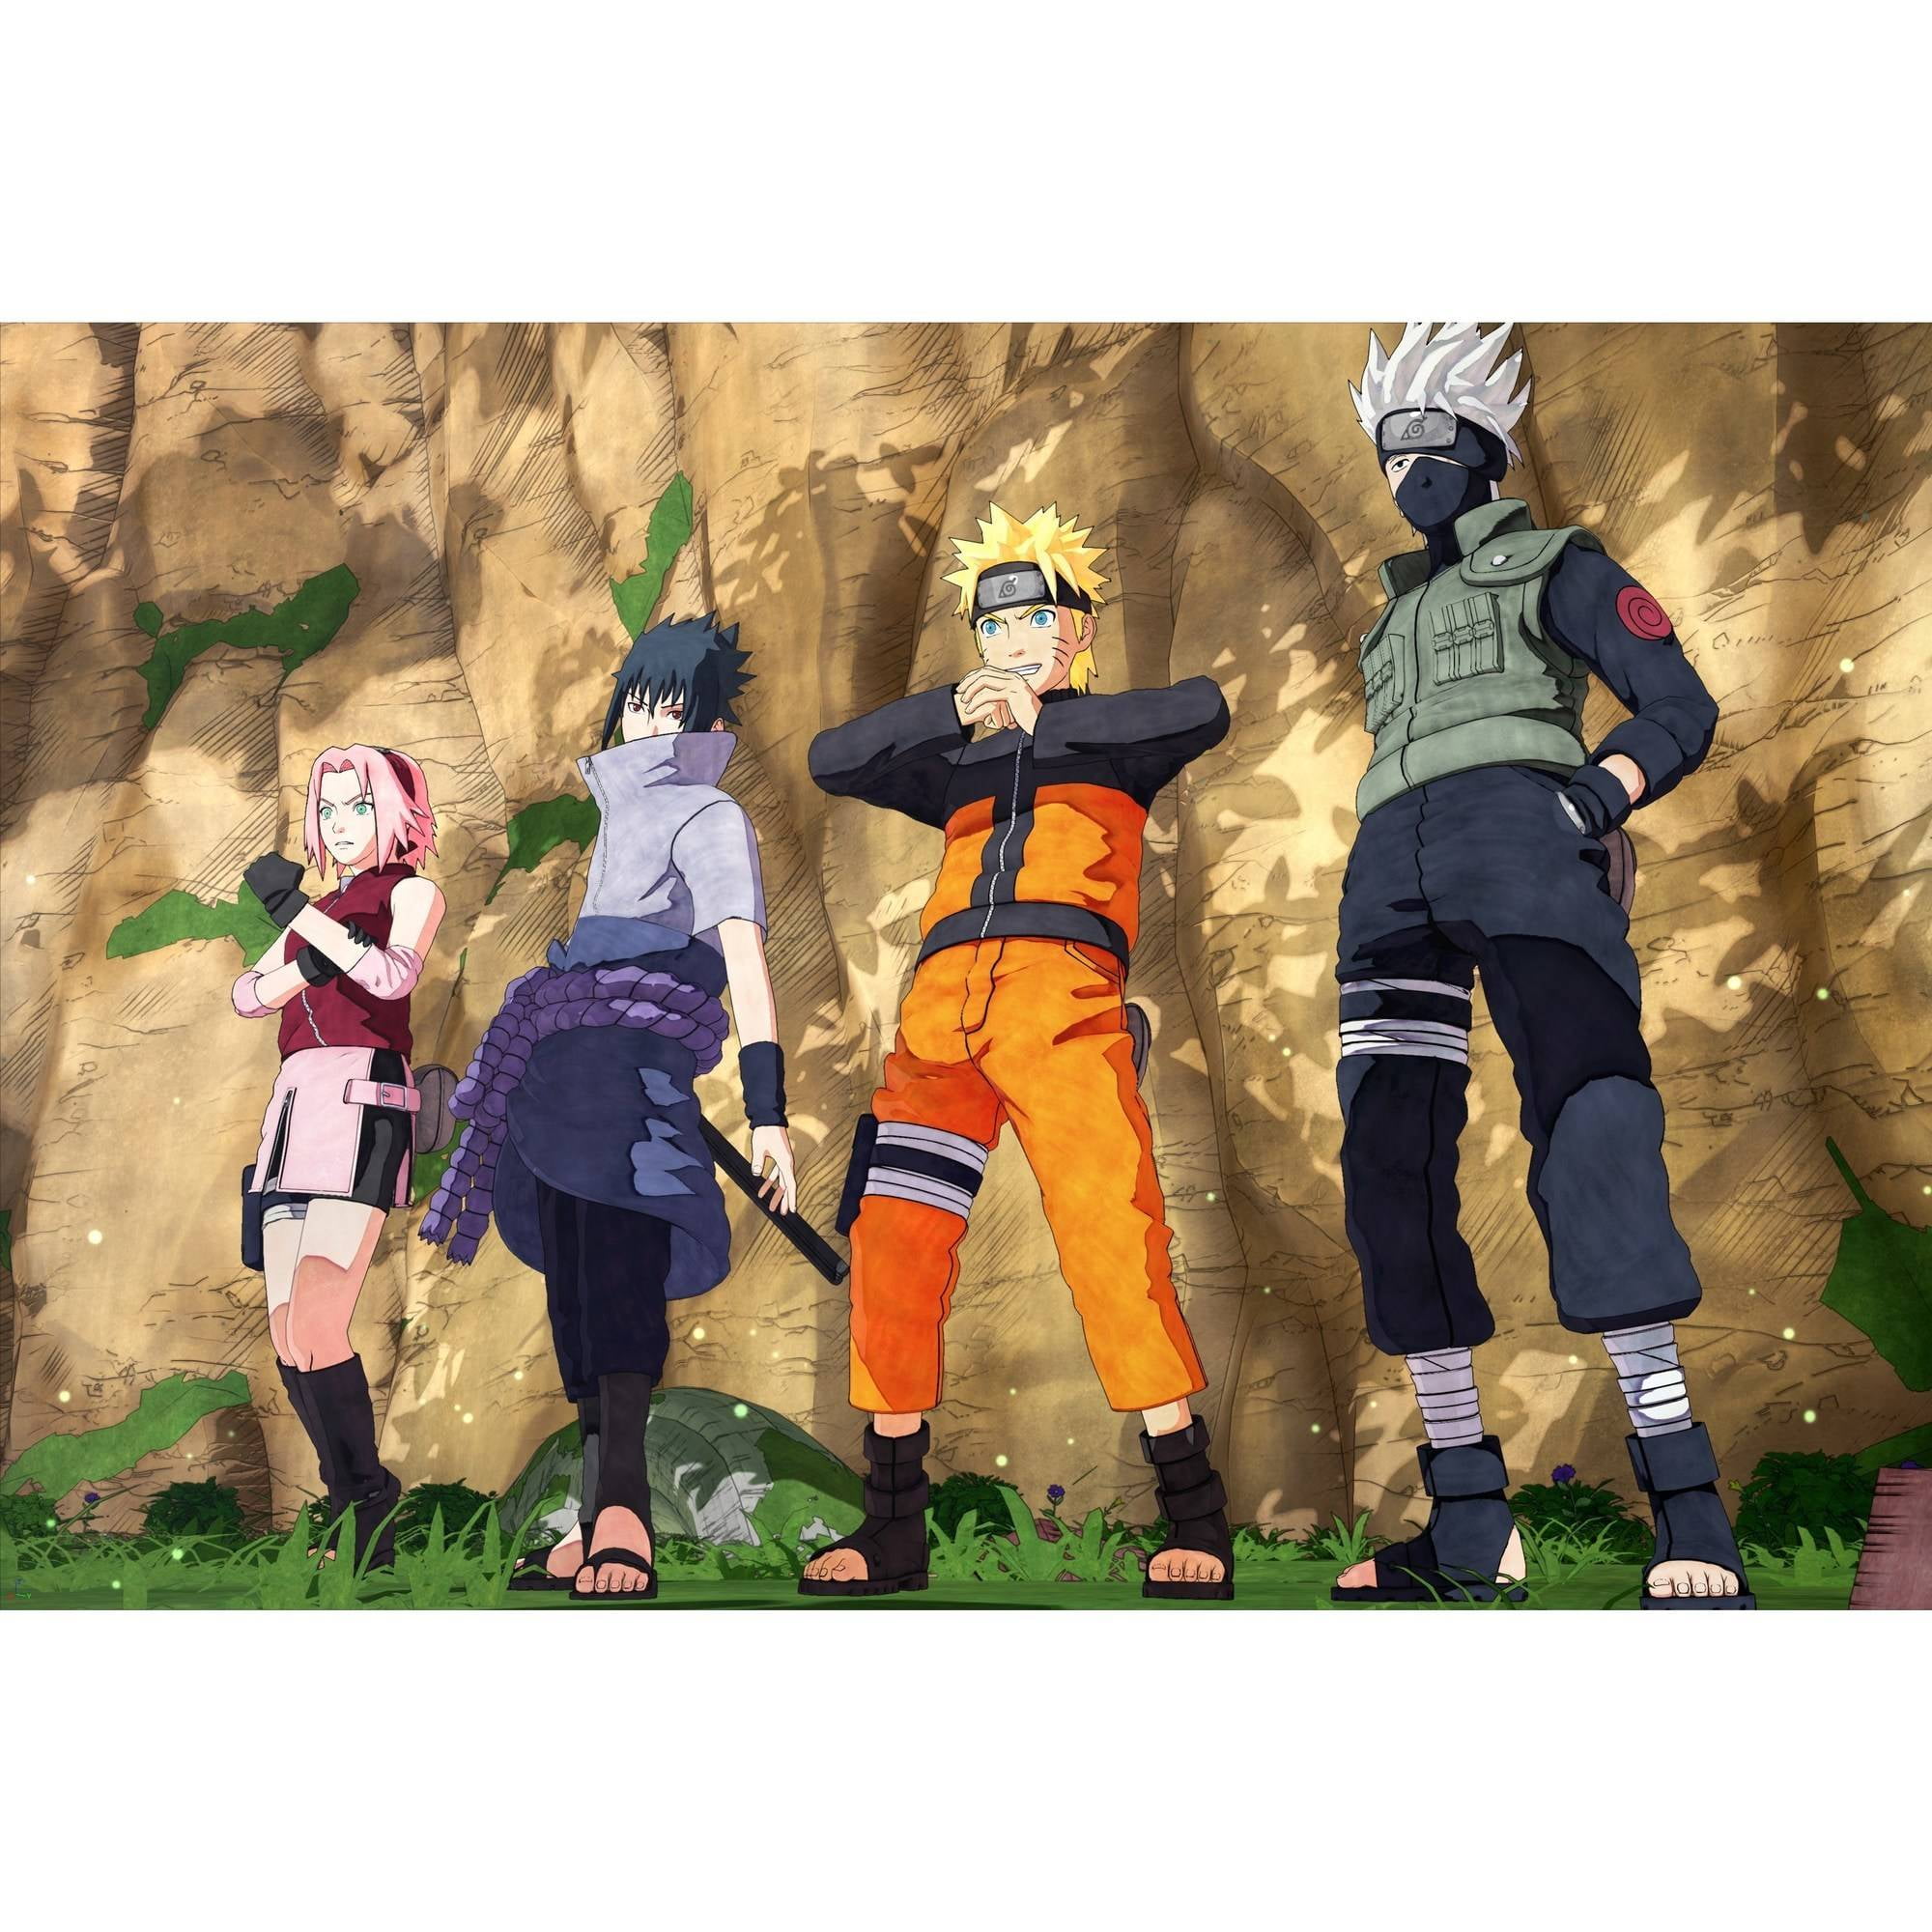 Bandai Namco's New Naruto Game Lets Players Discriminate Against, Block  Xbox Series S Players - FandomWire